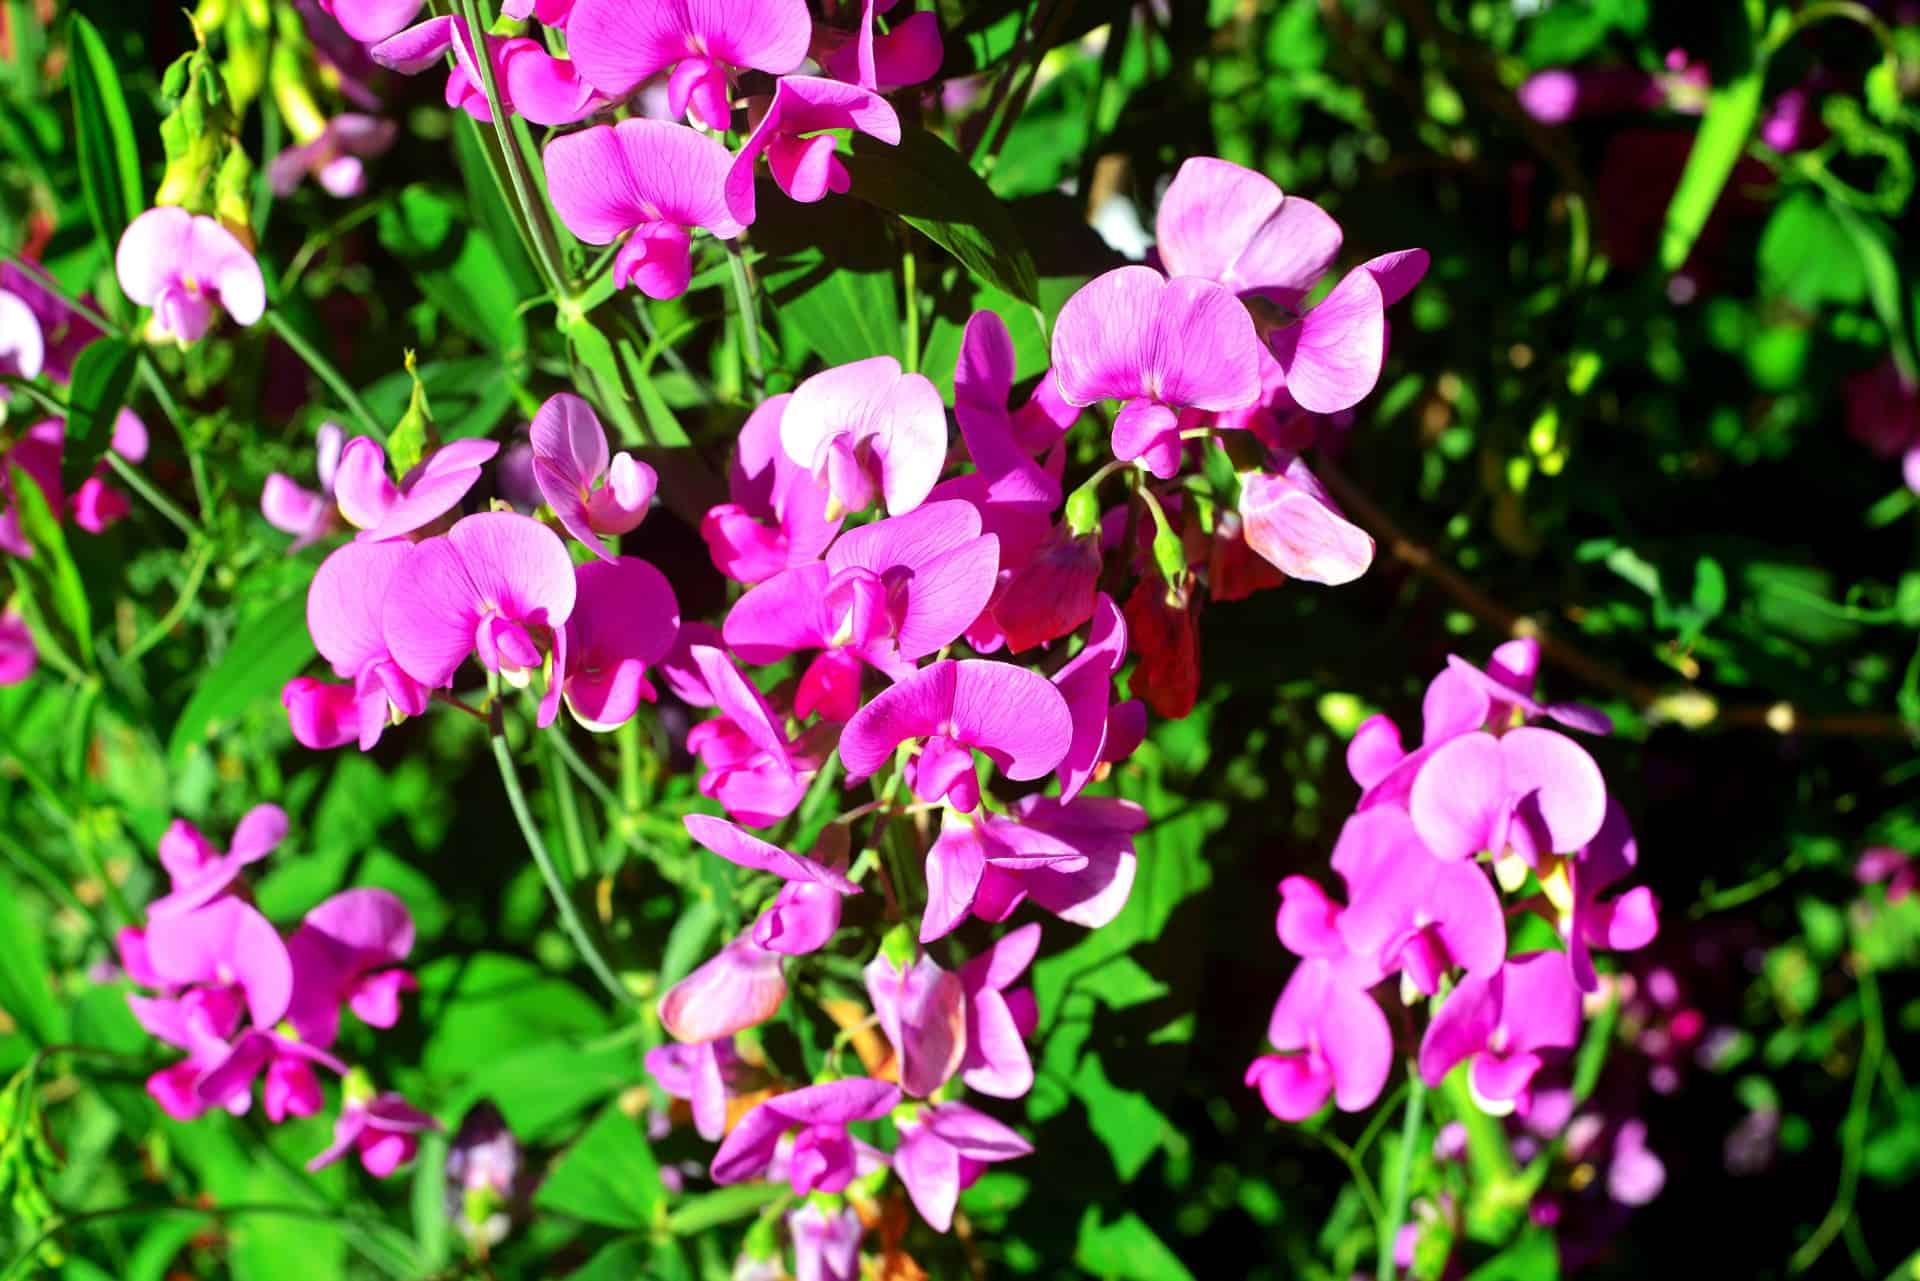 The sweet pea is an easy-growing annual vine.